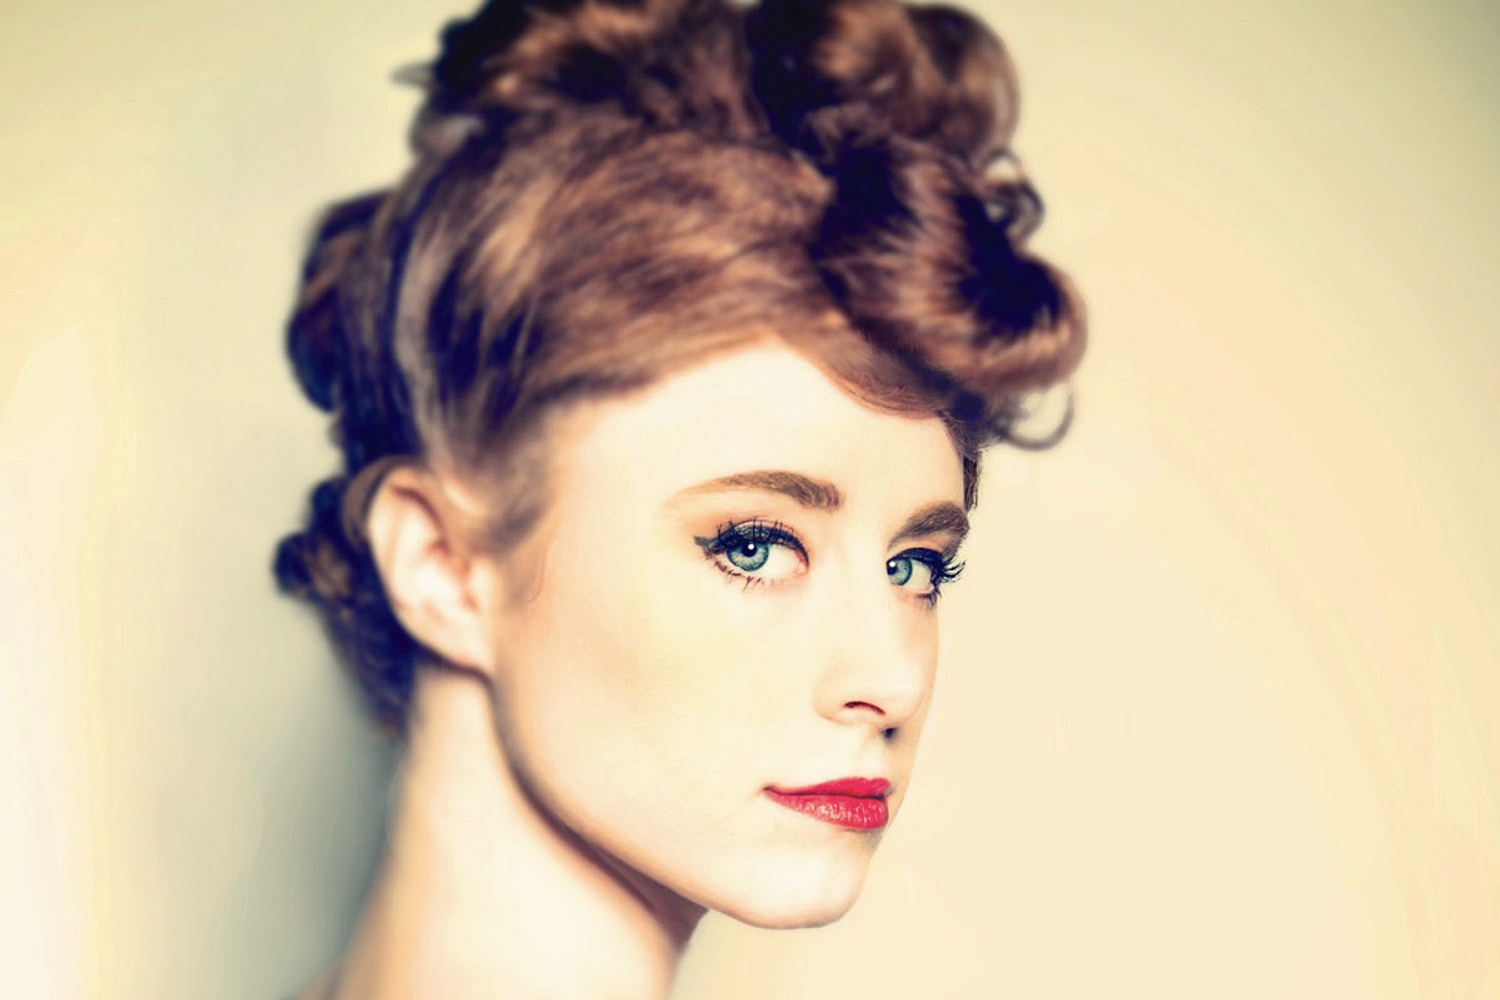 Kiesza shares ‘Losin’ My Mind’ from debut album, ‘Sound of a Woman’